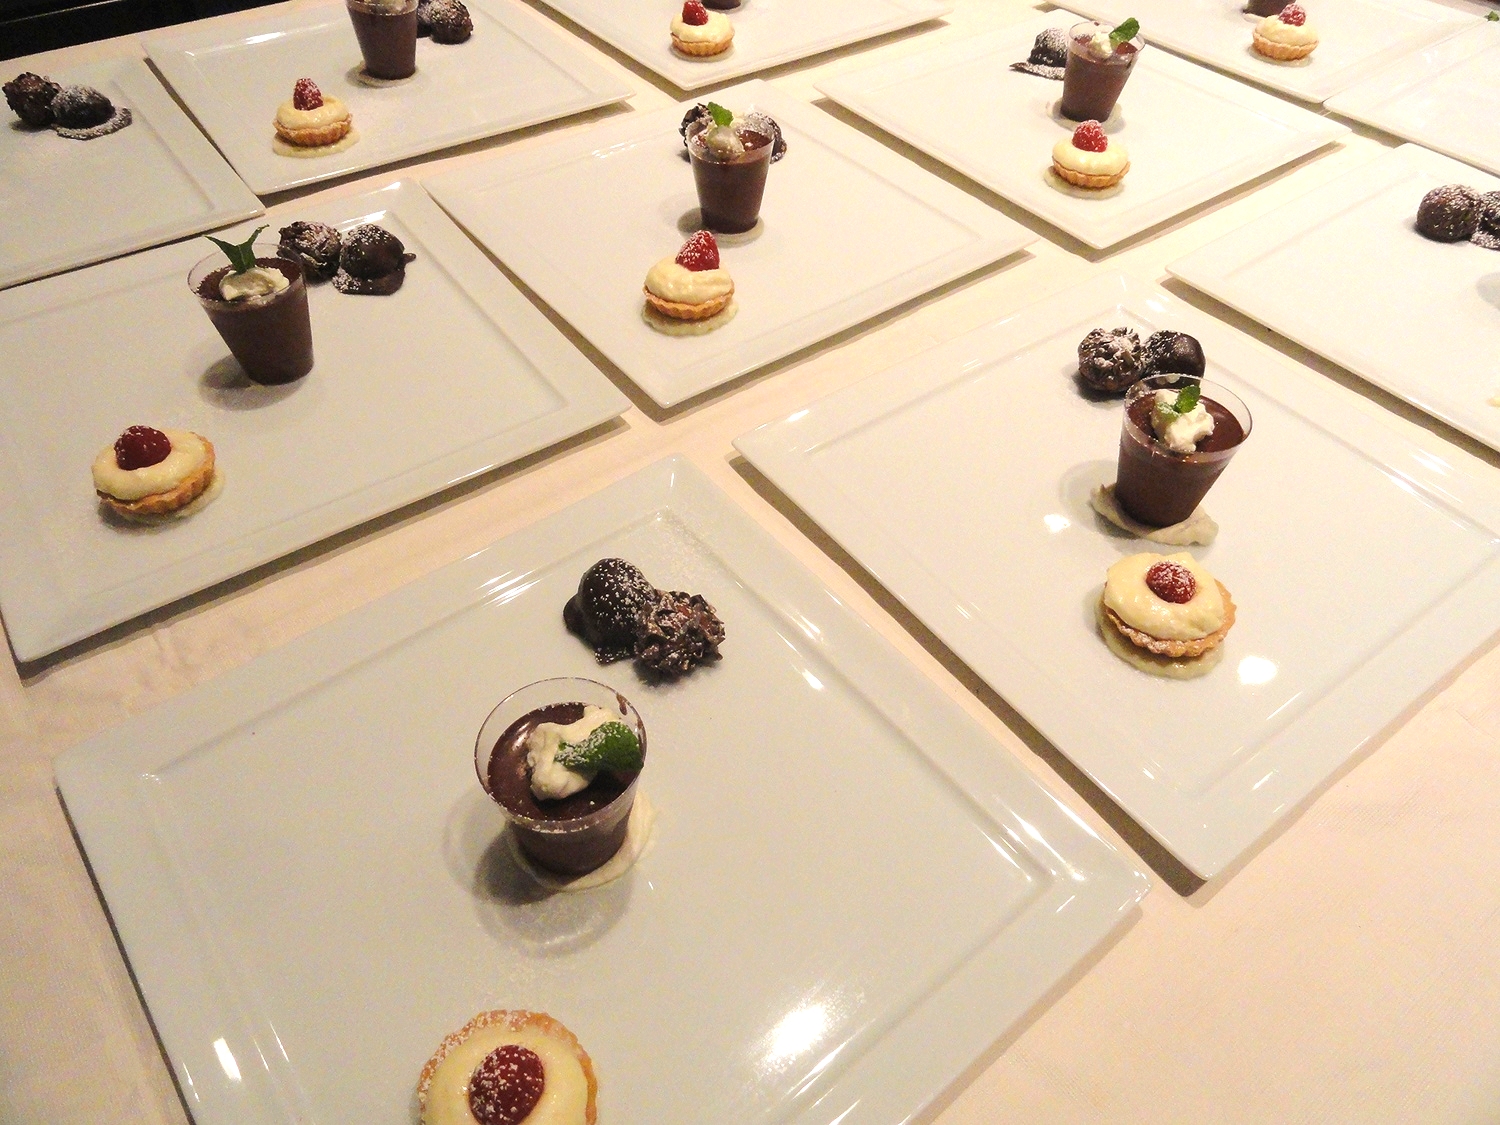 Chocolate trio: Chocolate pot de creme with minted cream, white chocolate mousse tartlet, chocolate champagne truffles